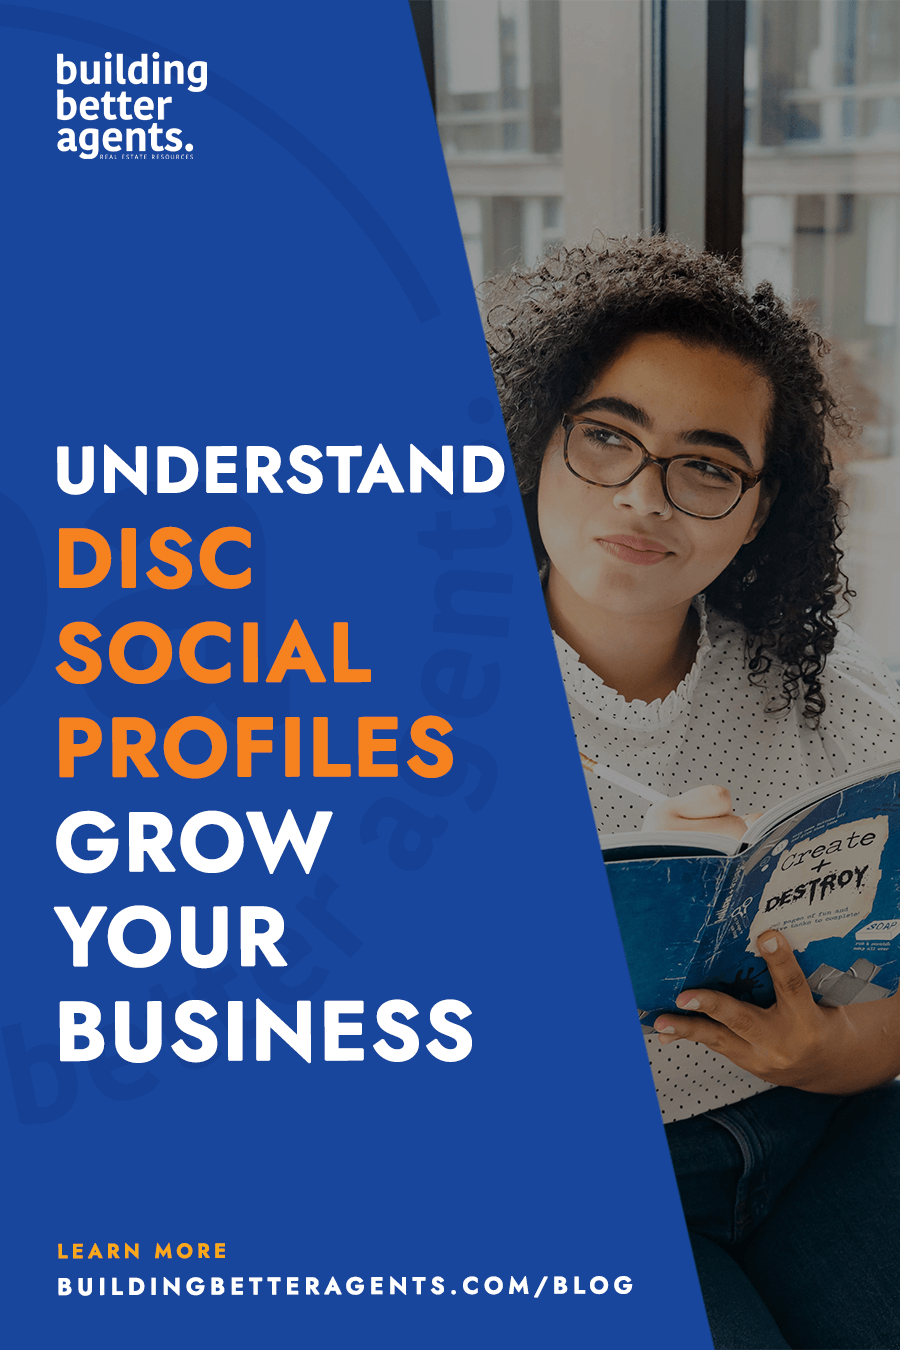 Understand DISC Social Profiles and Grow Your Business